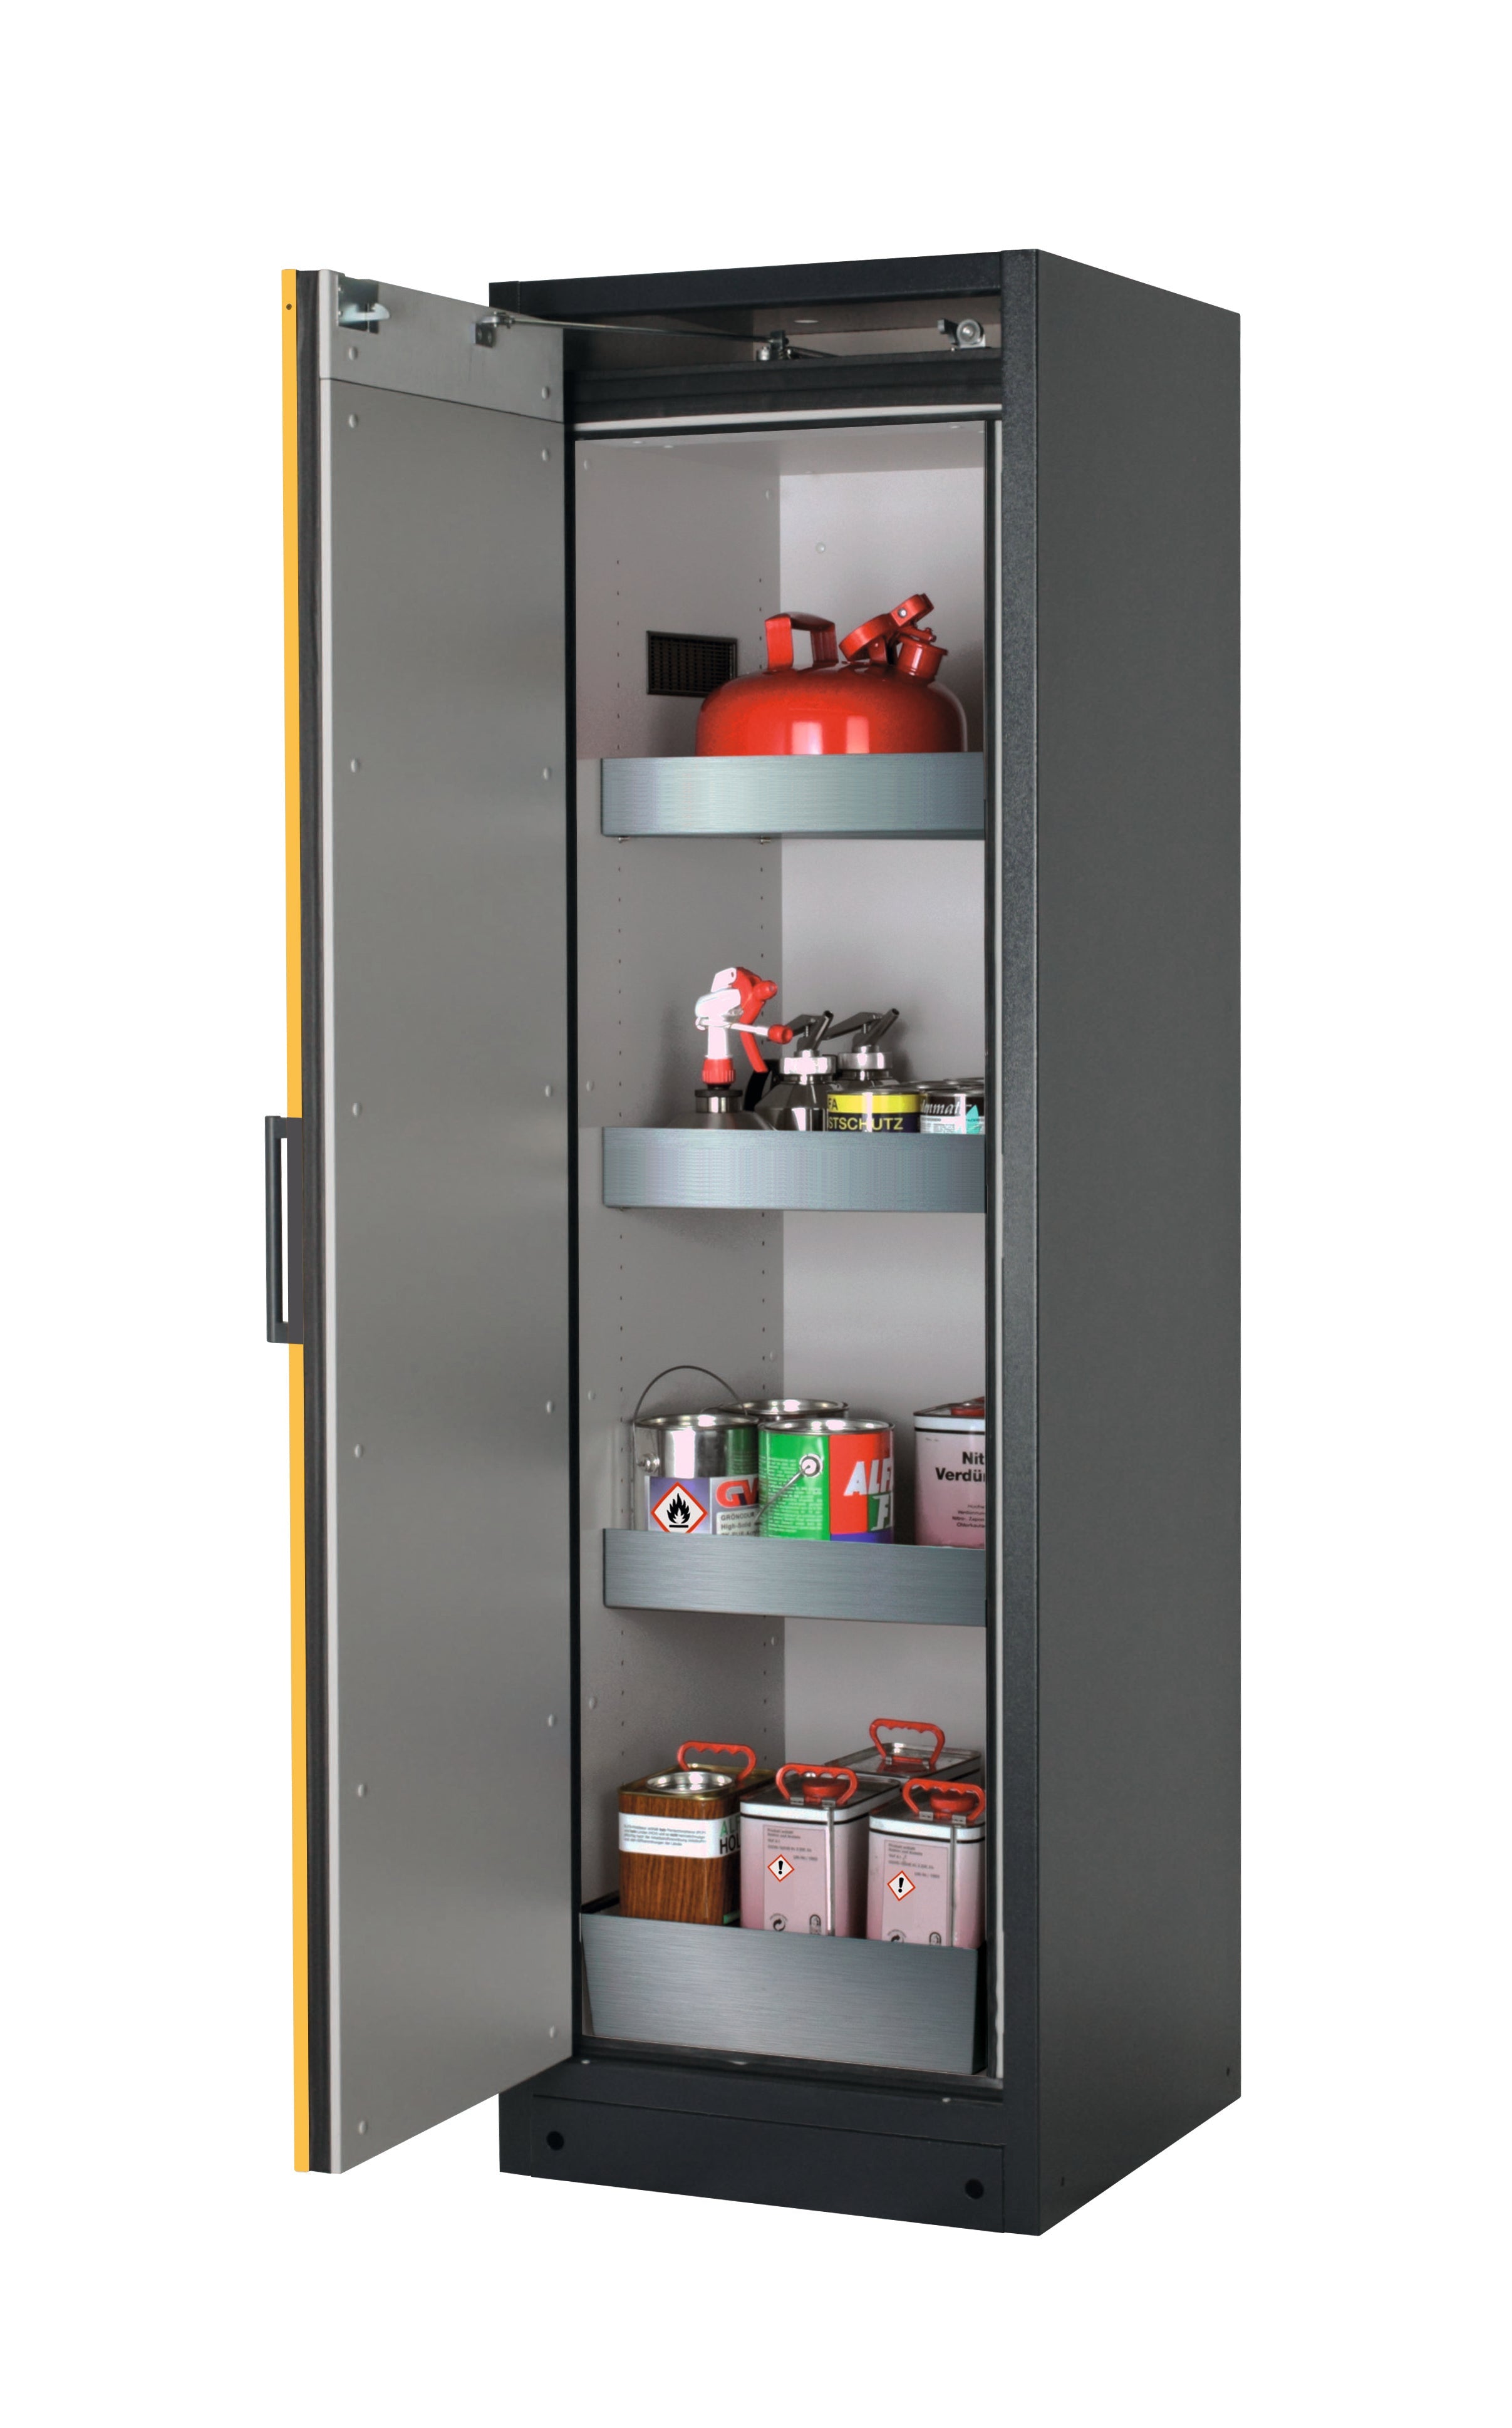 Type 90 safety storage cabinet Q-CLASSIC-90 model Q90.195.060 in warning yellow RAL 1004 with 3x tray shelf (standard) (stainless steel 1.4301),